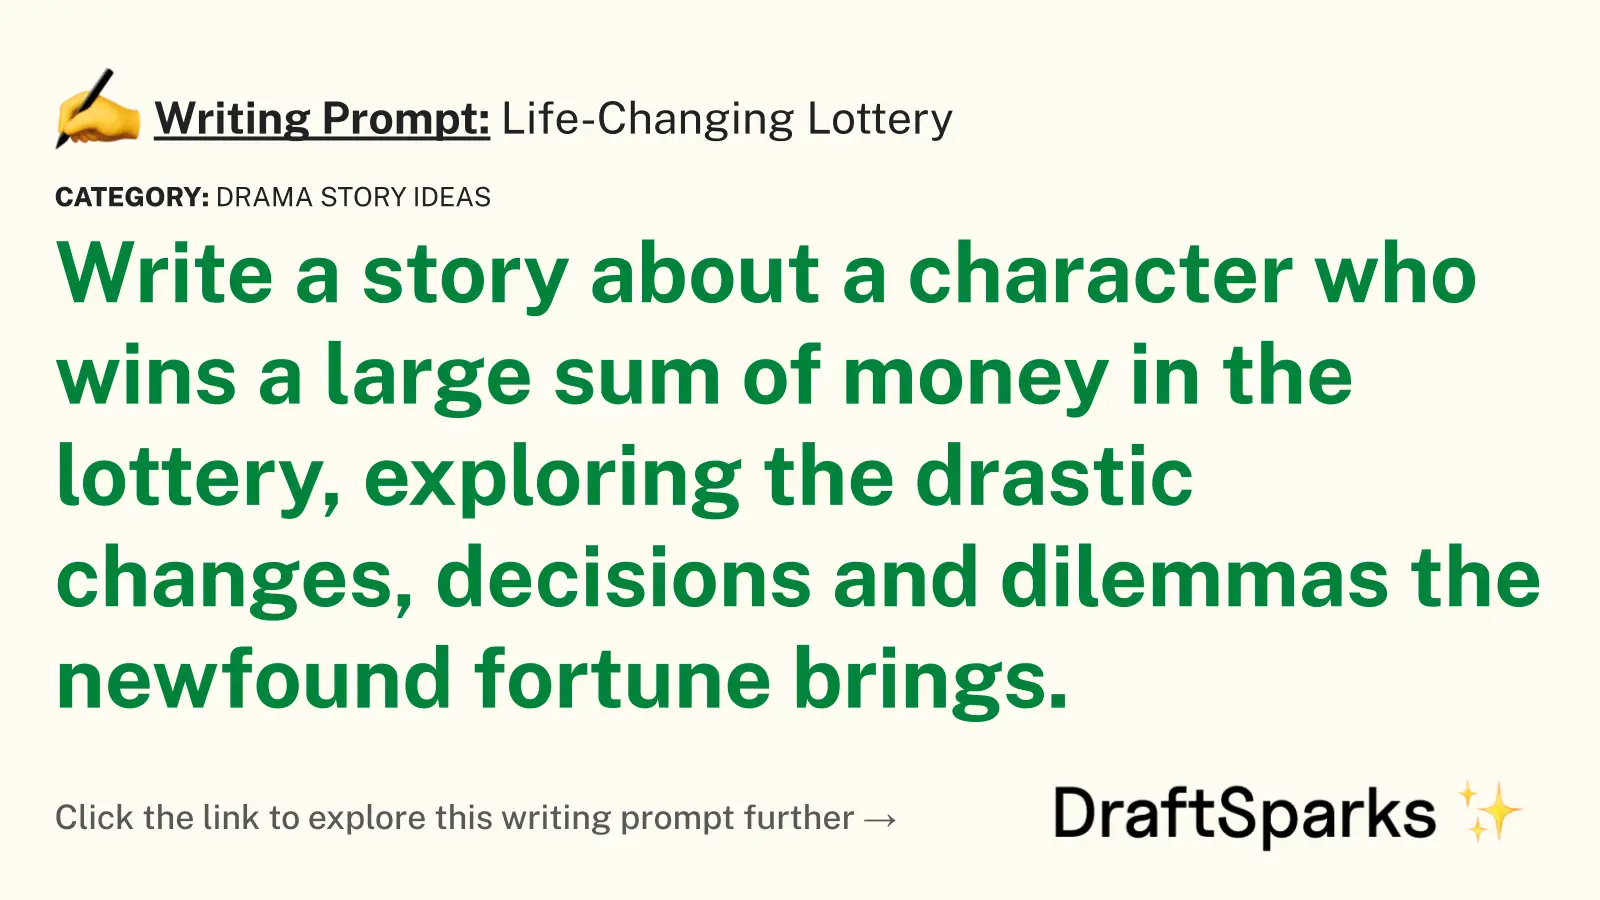 Life-Changing Lottery